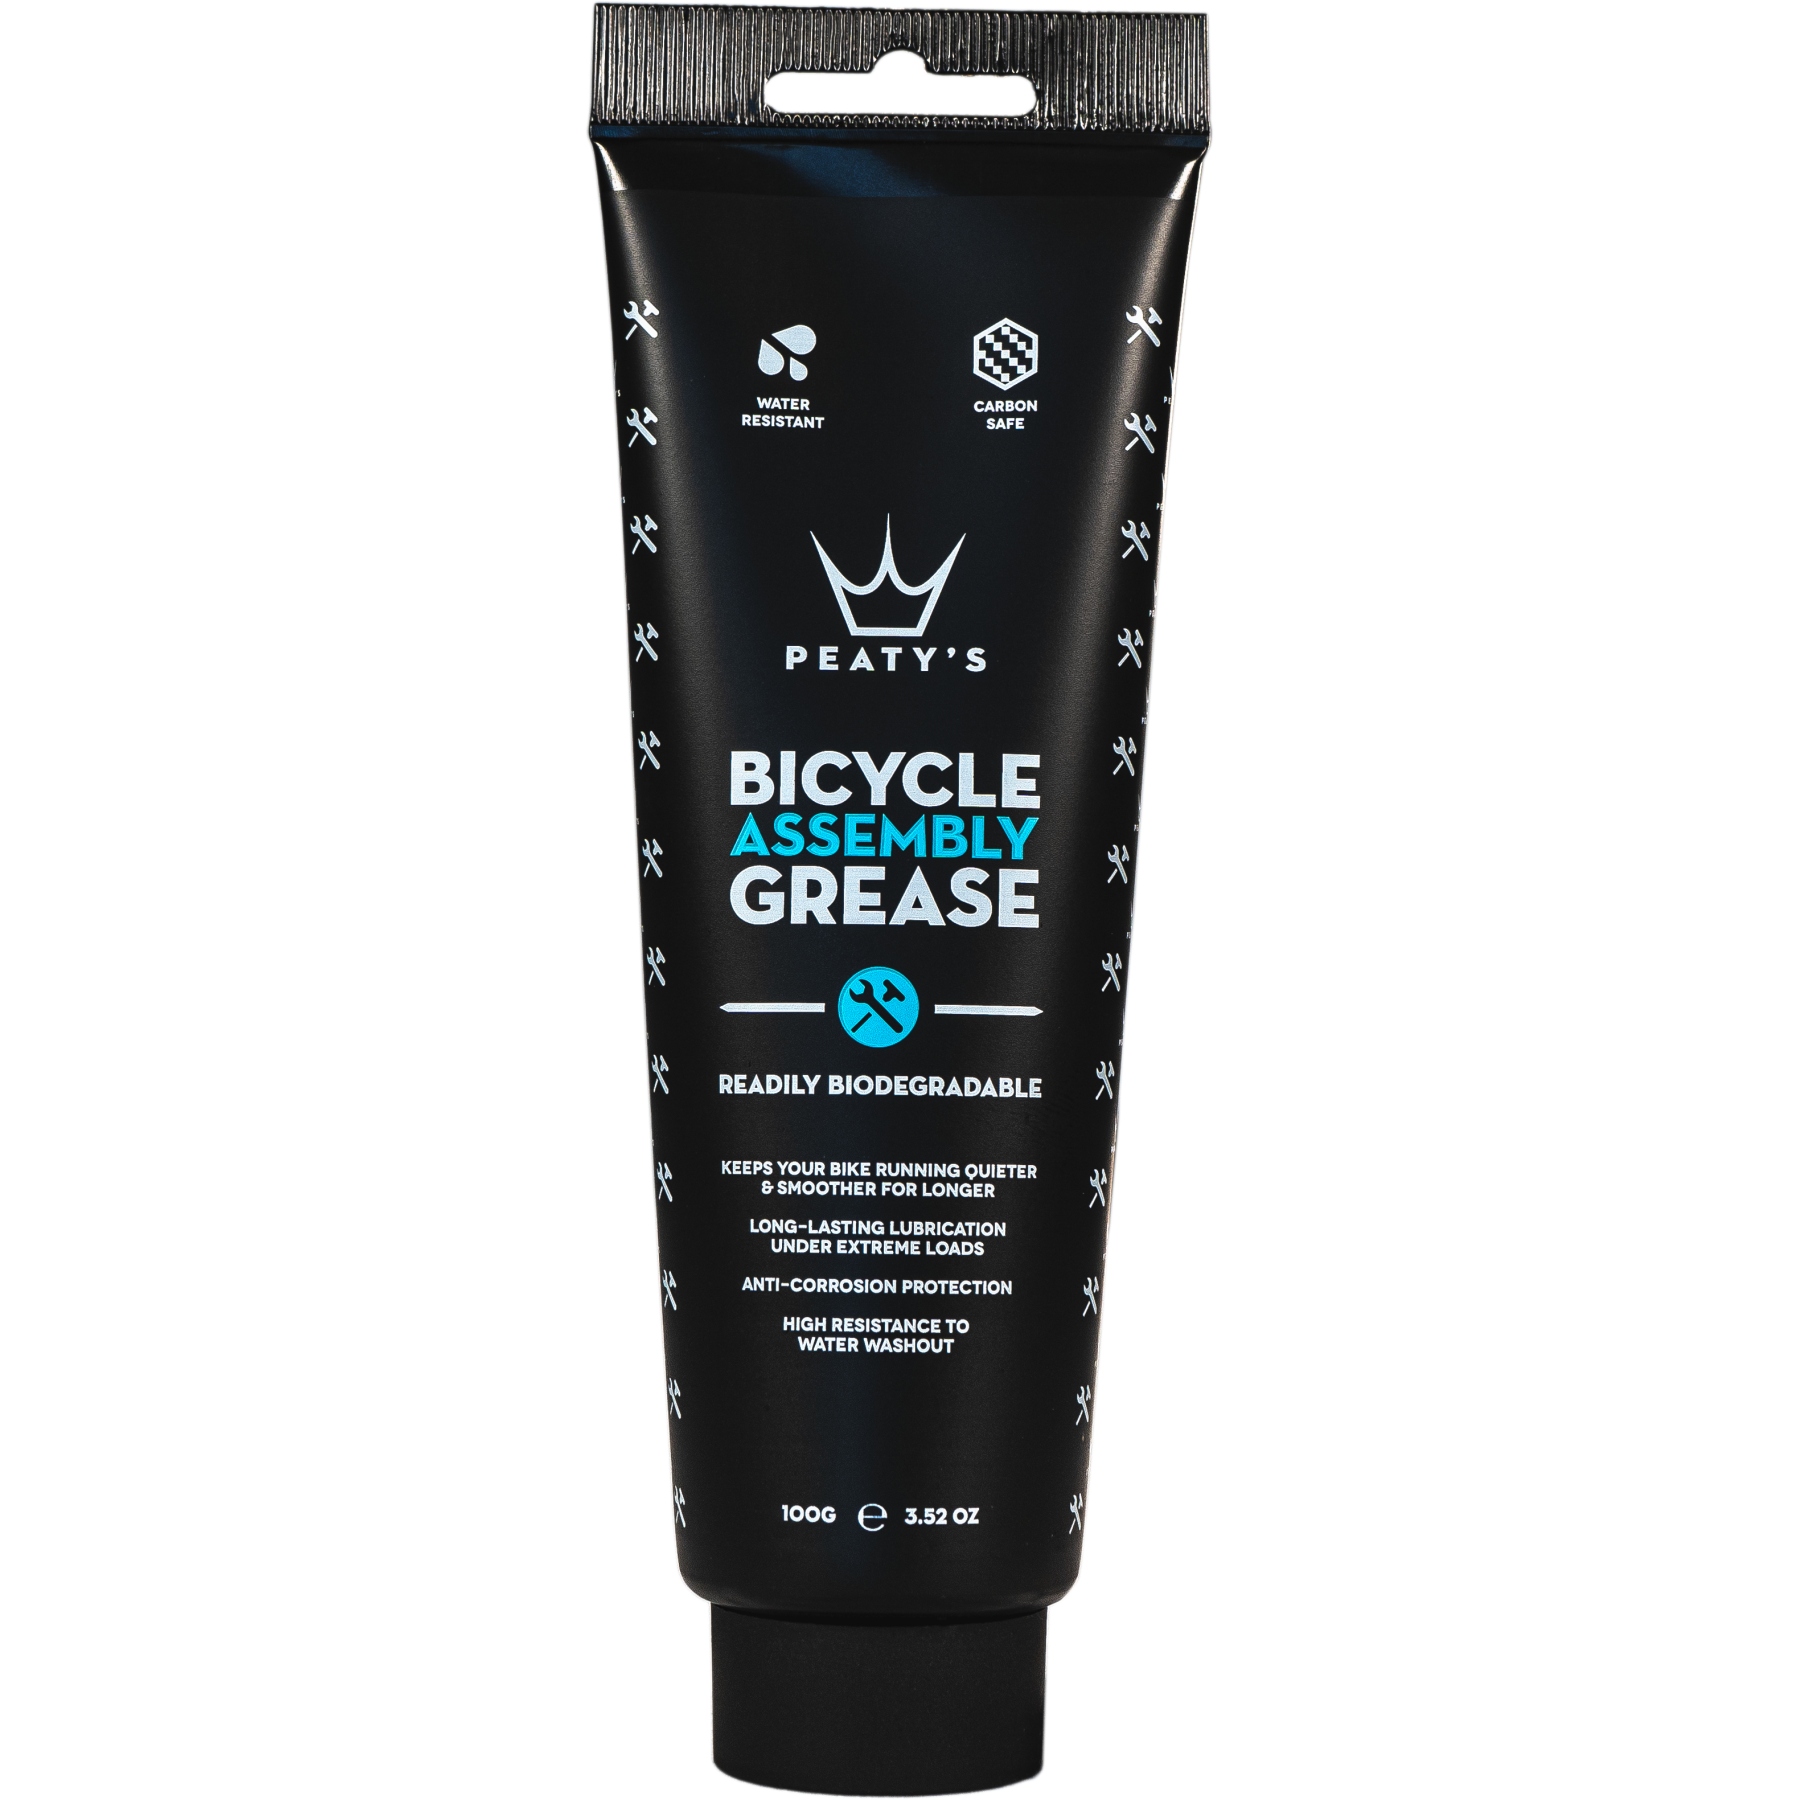 Productfoto van Peaty&#039;s Bicycle Assembly Grease - 100g